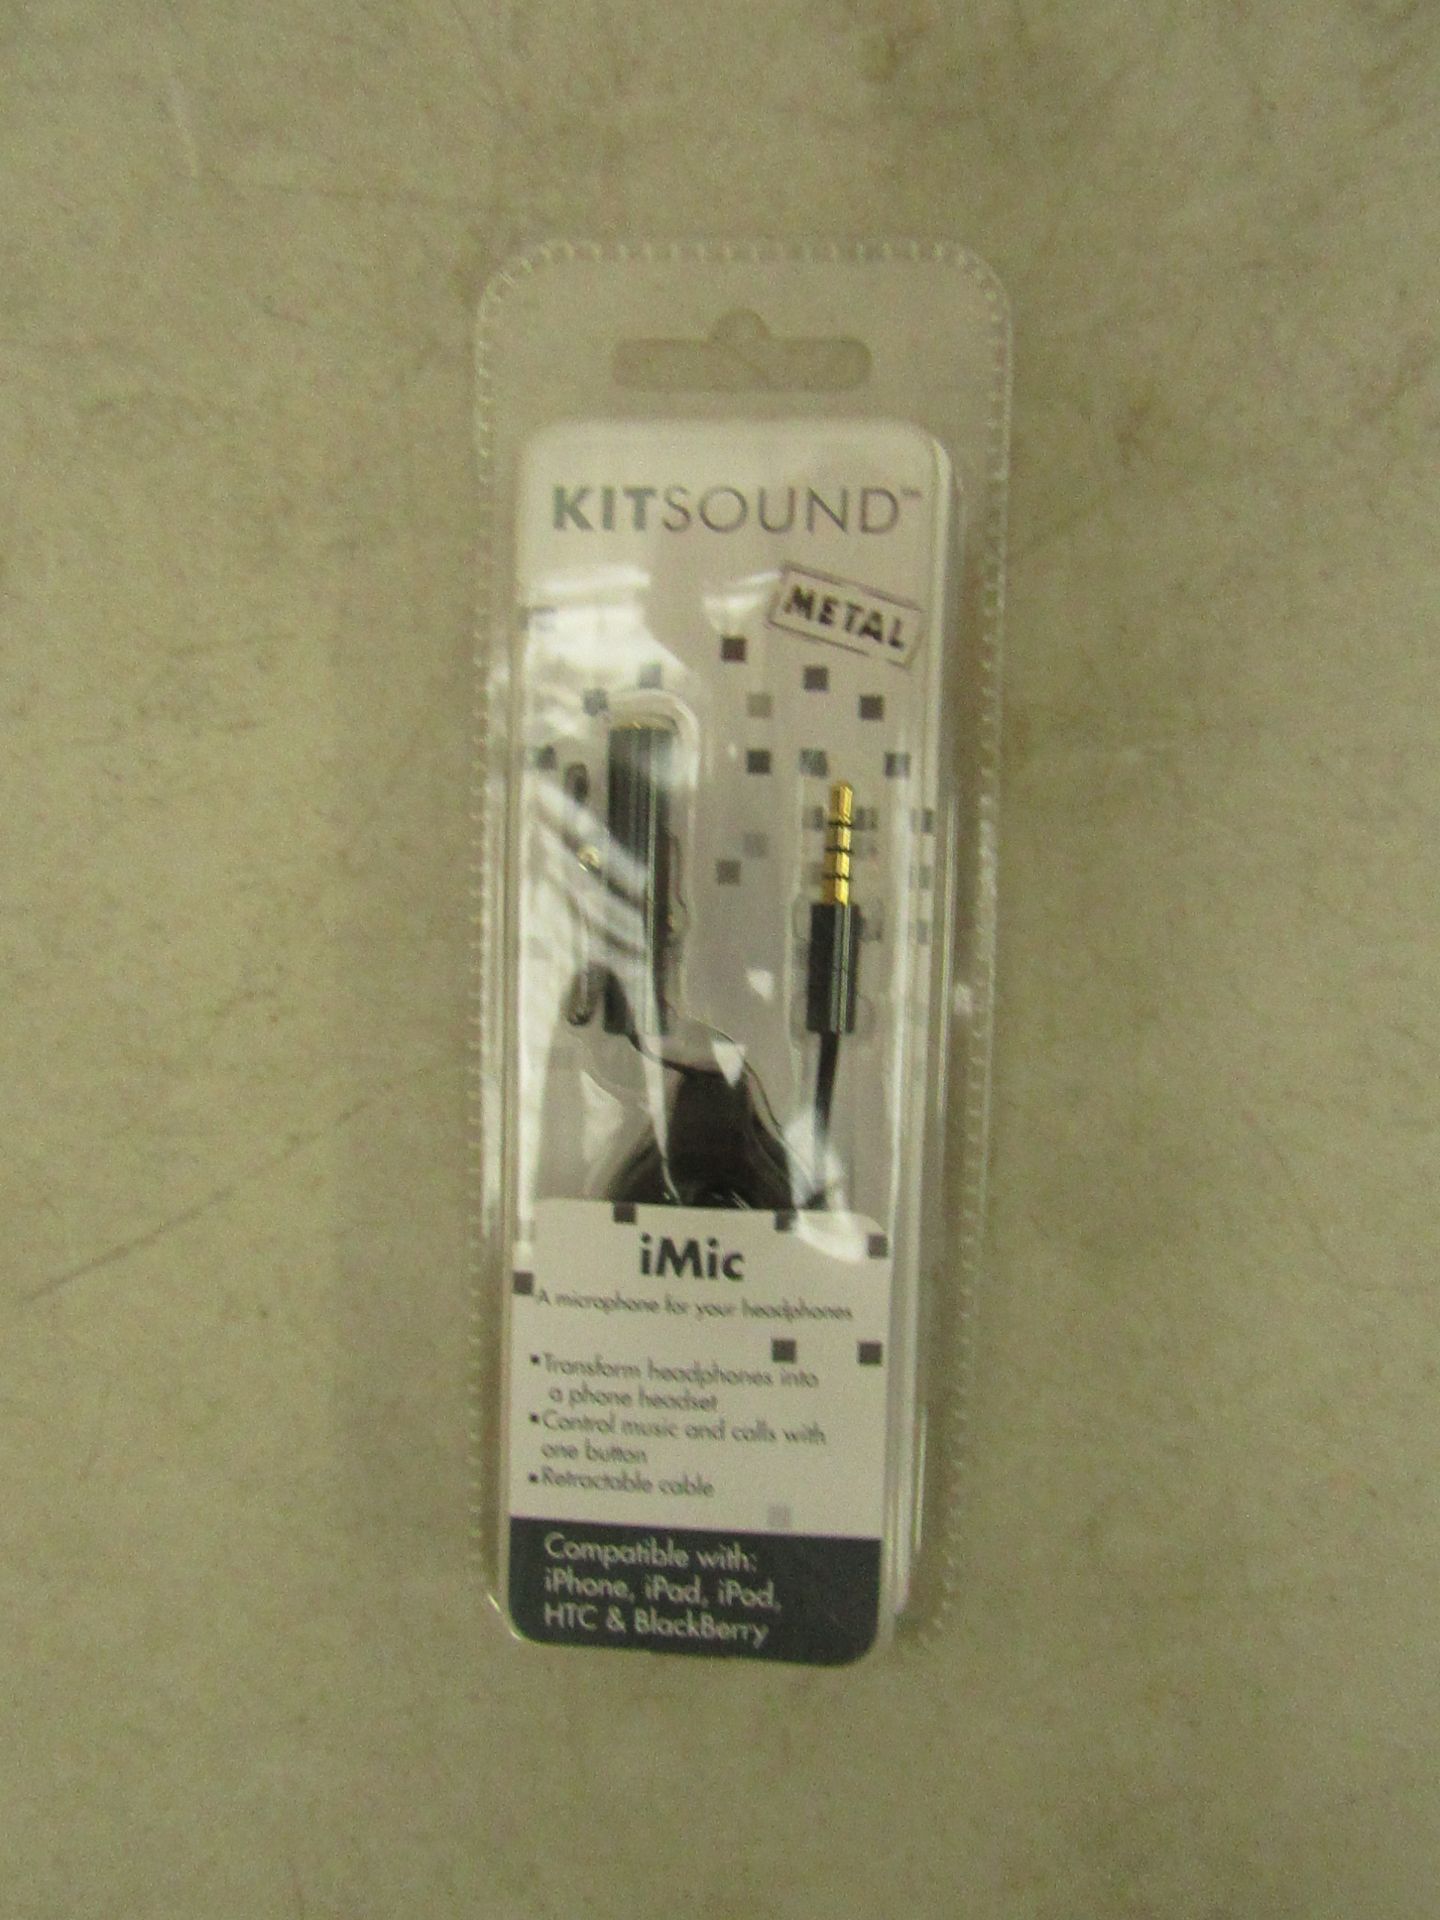 50x Kitsound iMic microphone for headphones, all new and packaged.